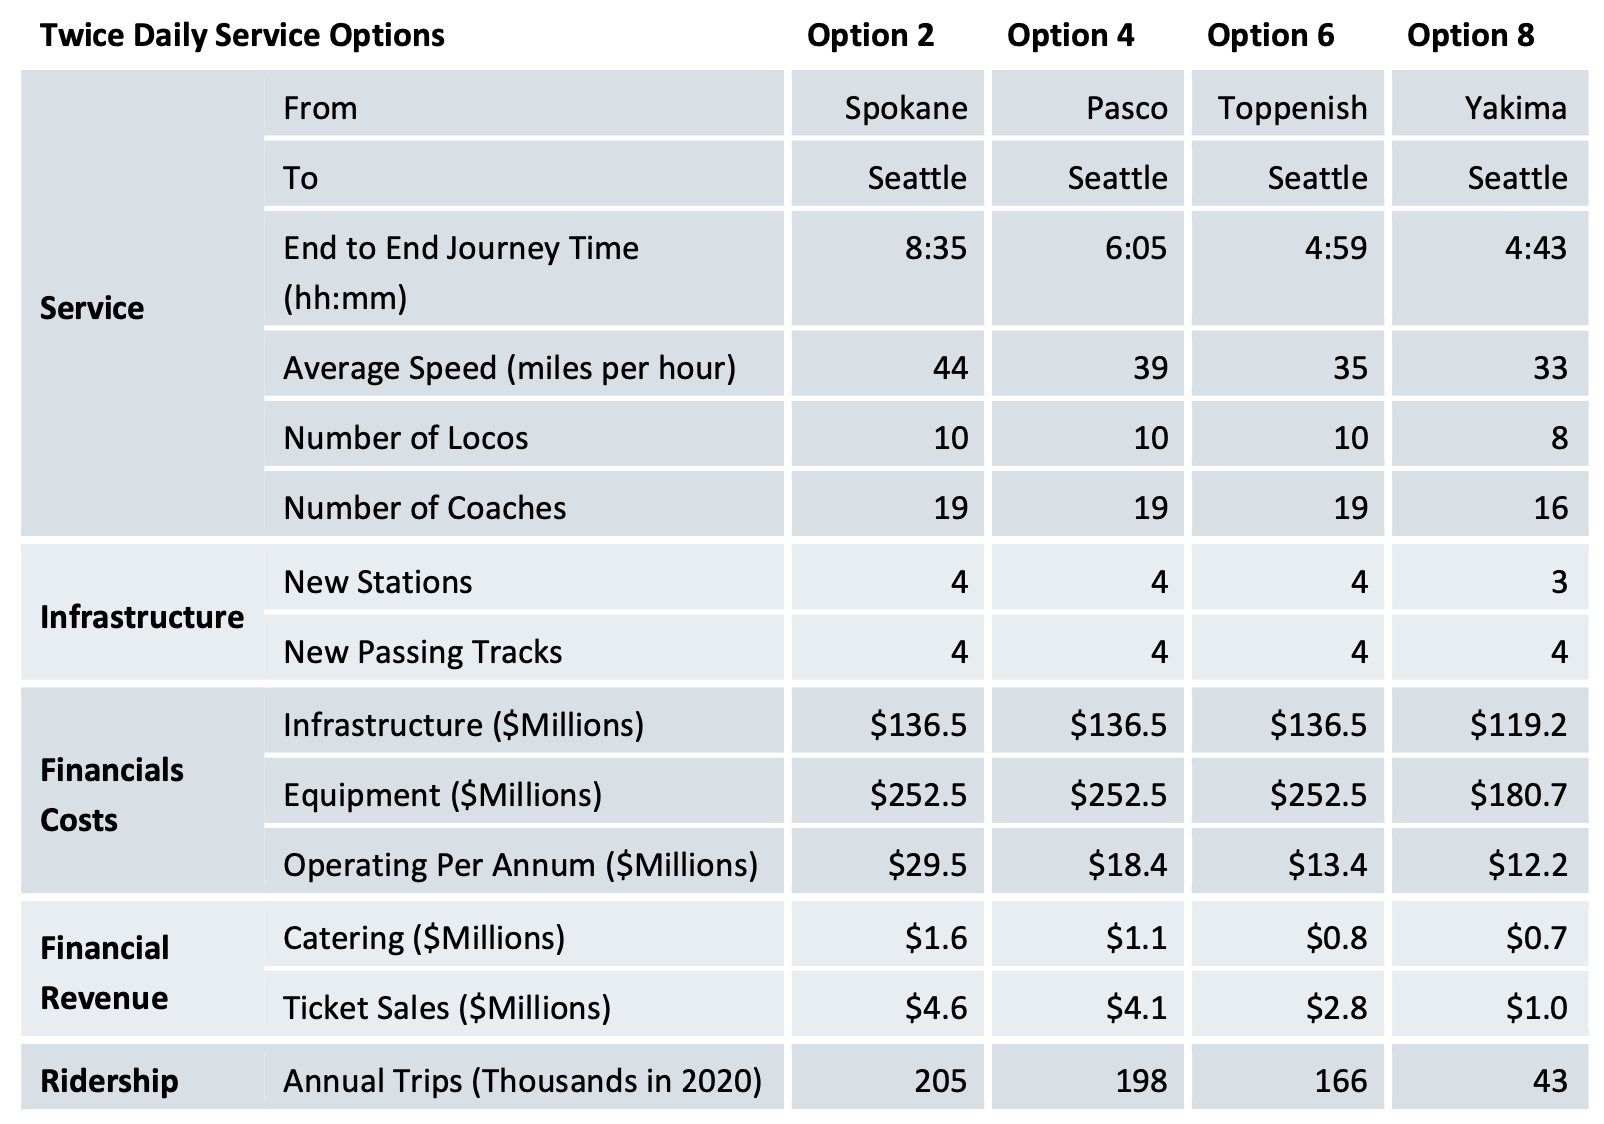 Details on Options 2, 4, 6, and 8 such as ridership, revenue, costs, speed, and asset requirements. (WSJTC / Steer)